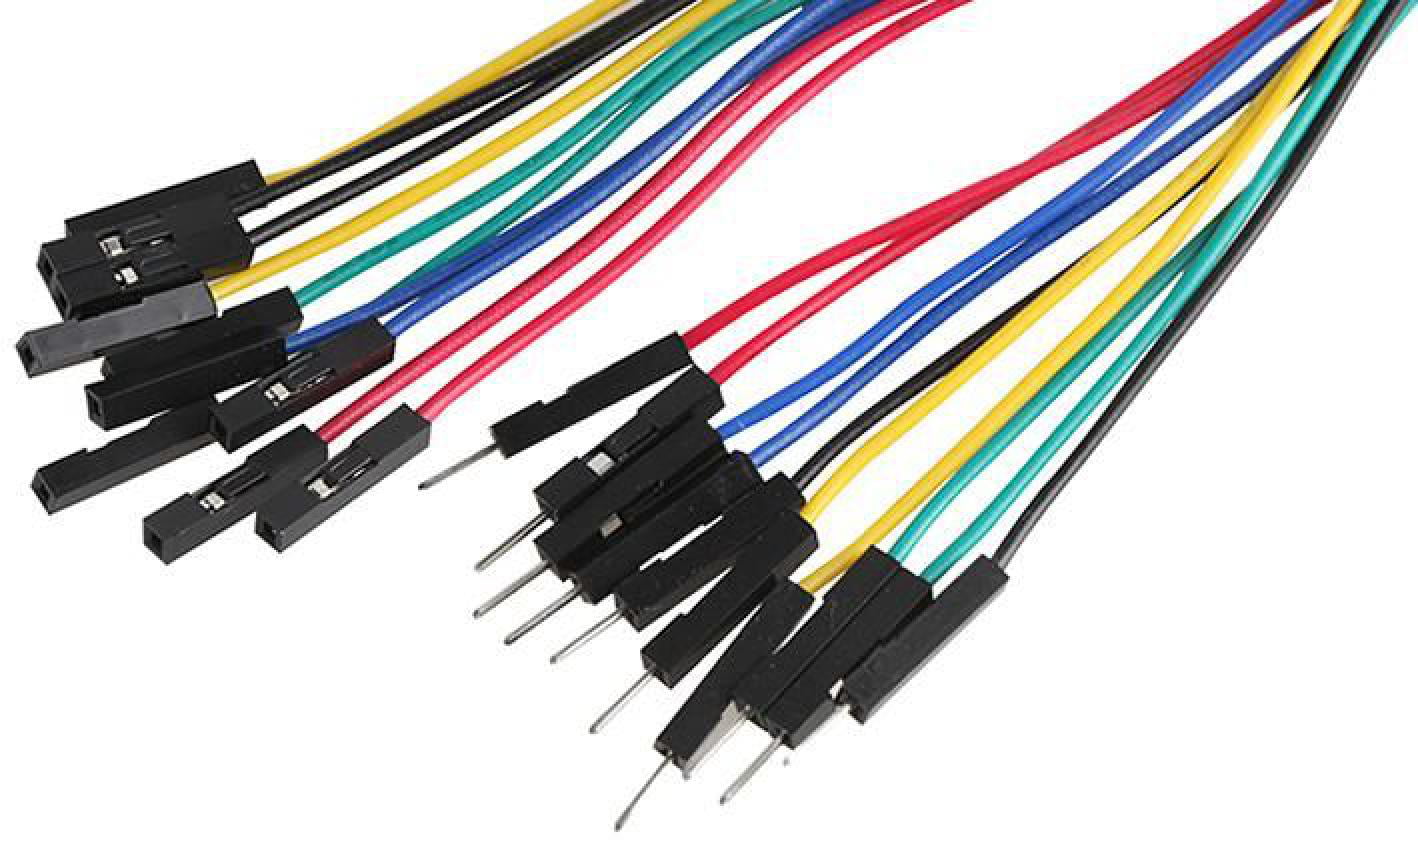 PSG-JMP150MF Pro Signal, Jumper Cable, Raspberry Pi Breakout, Male to  Female Connector